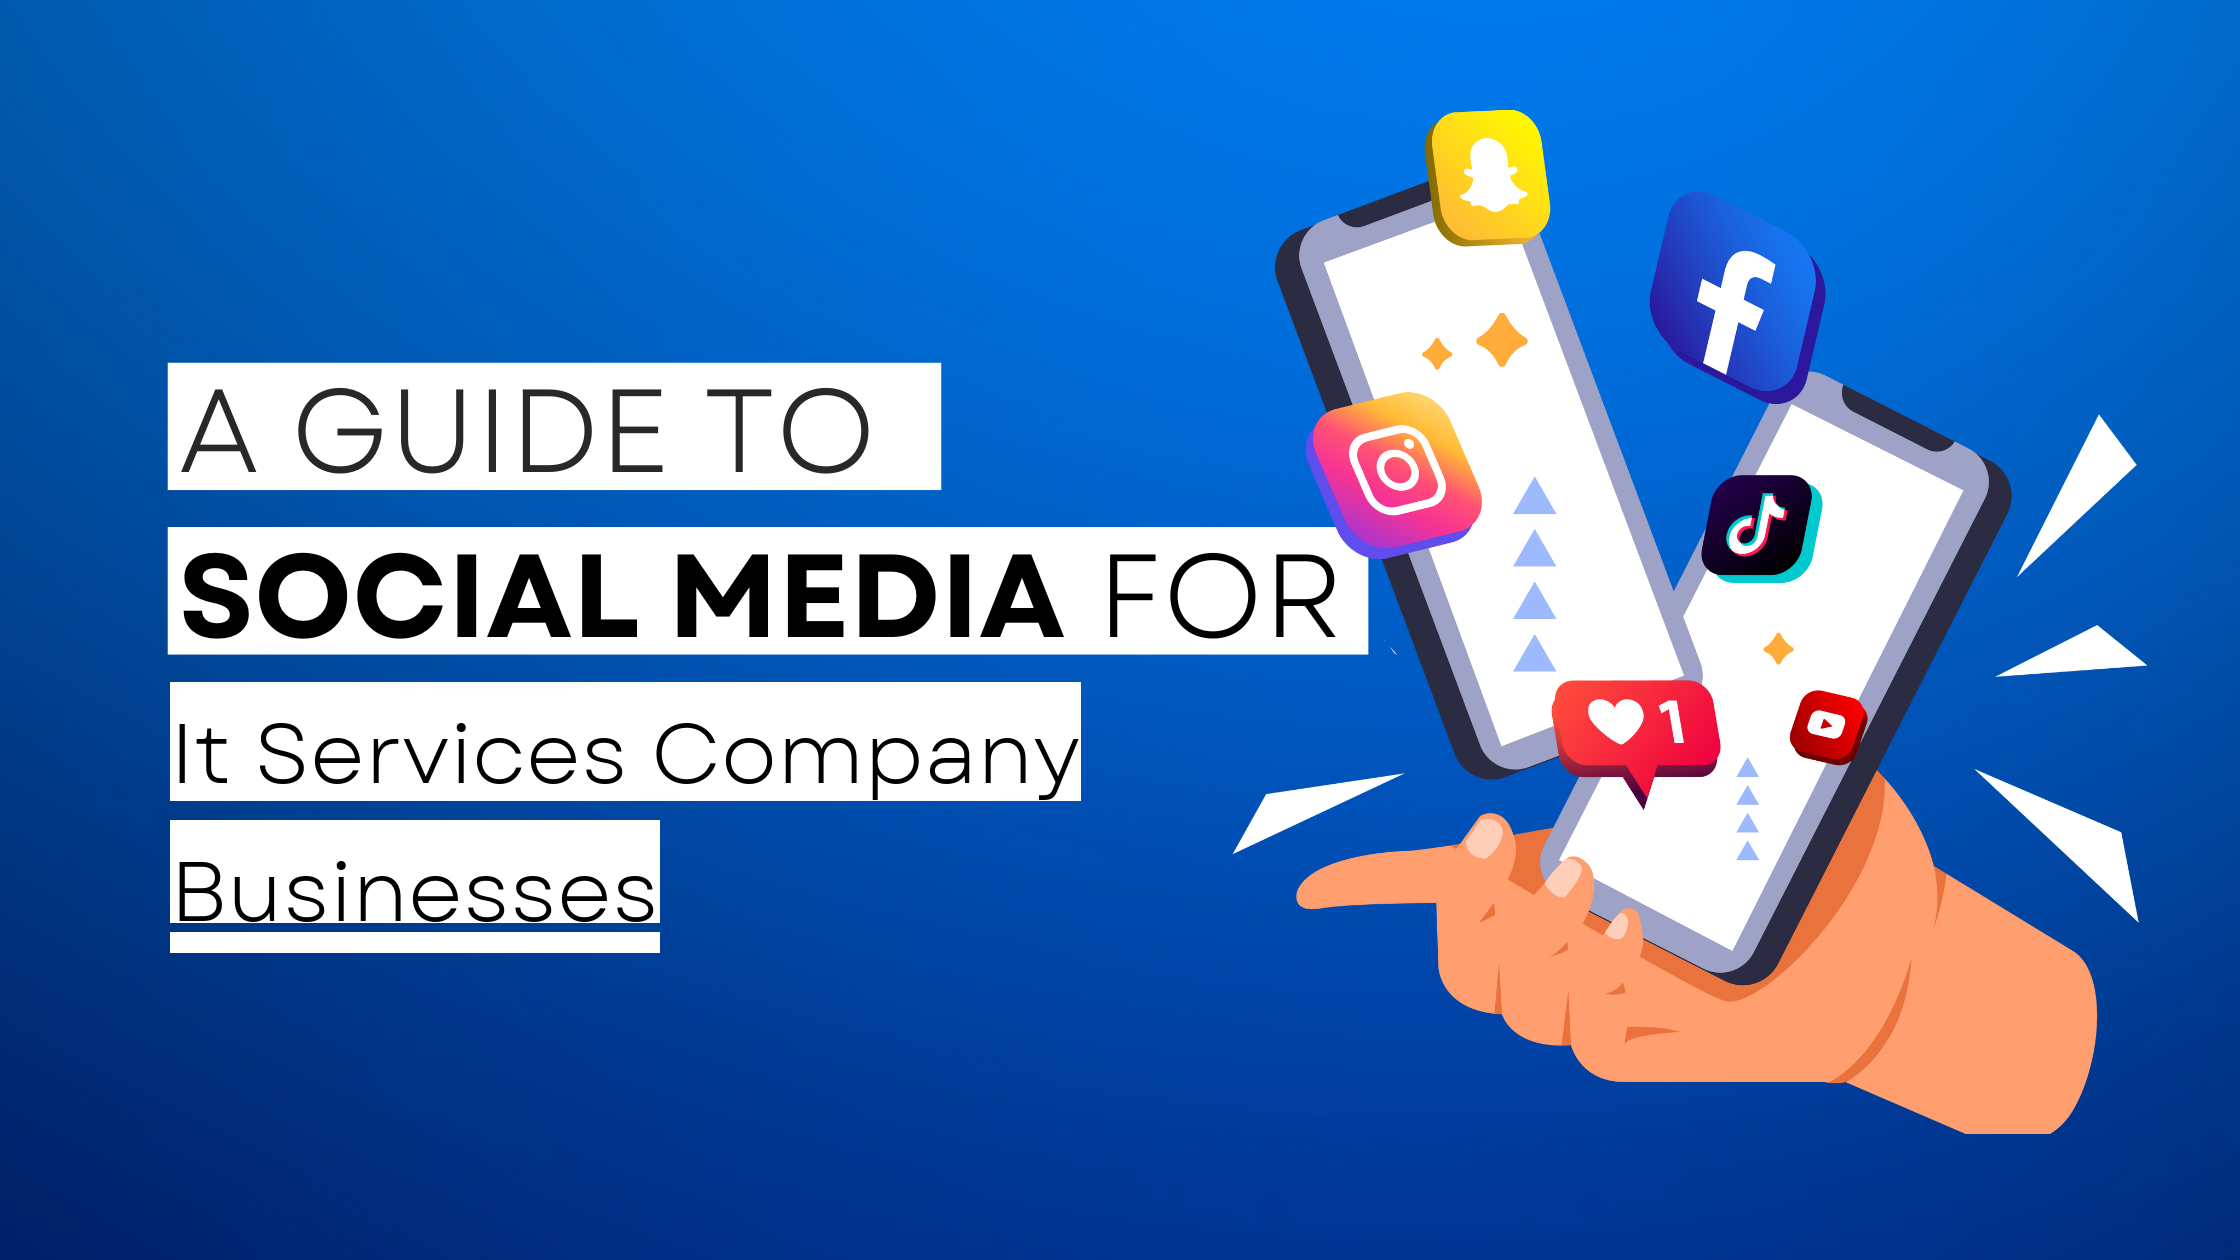 How to start It Services Company on social media